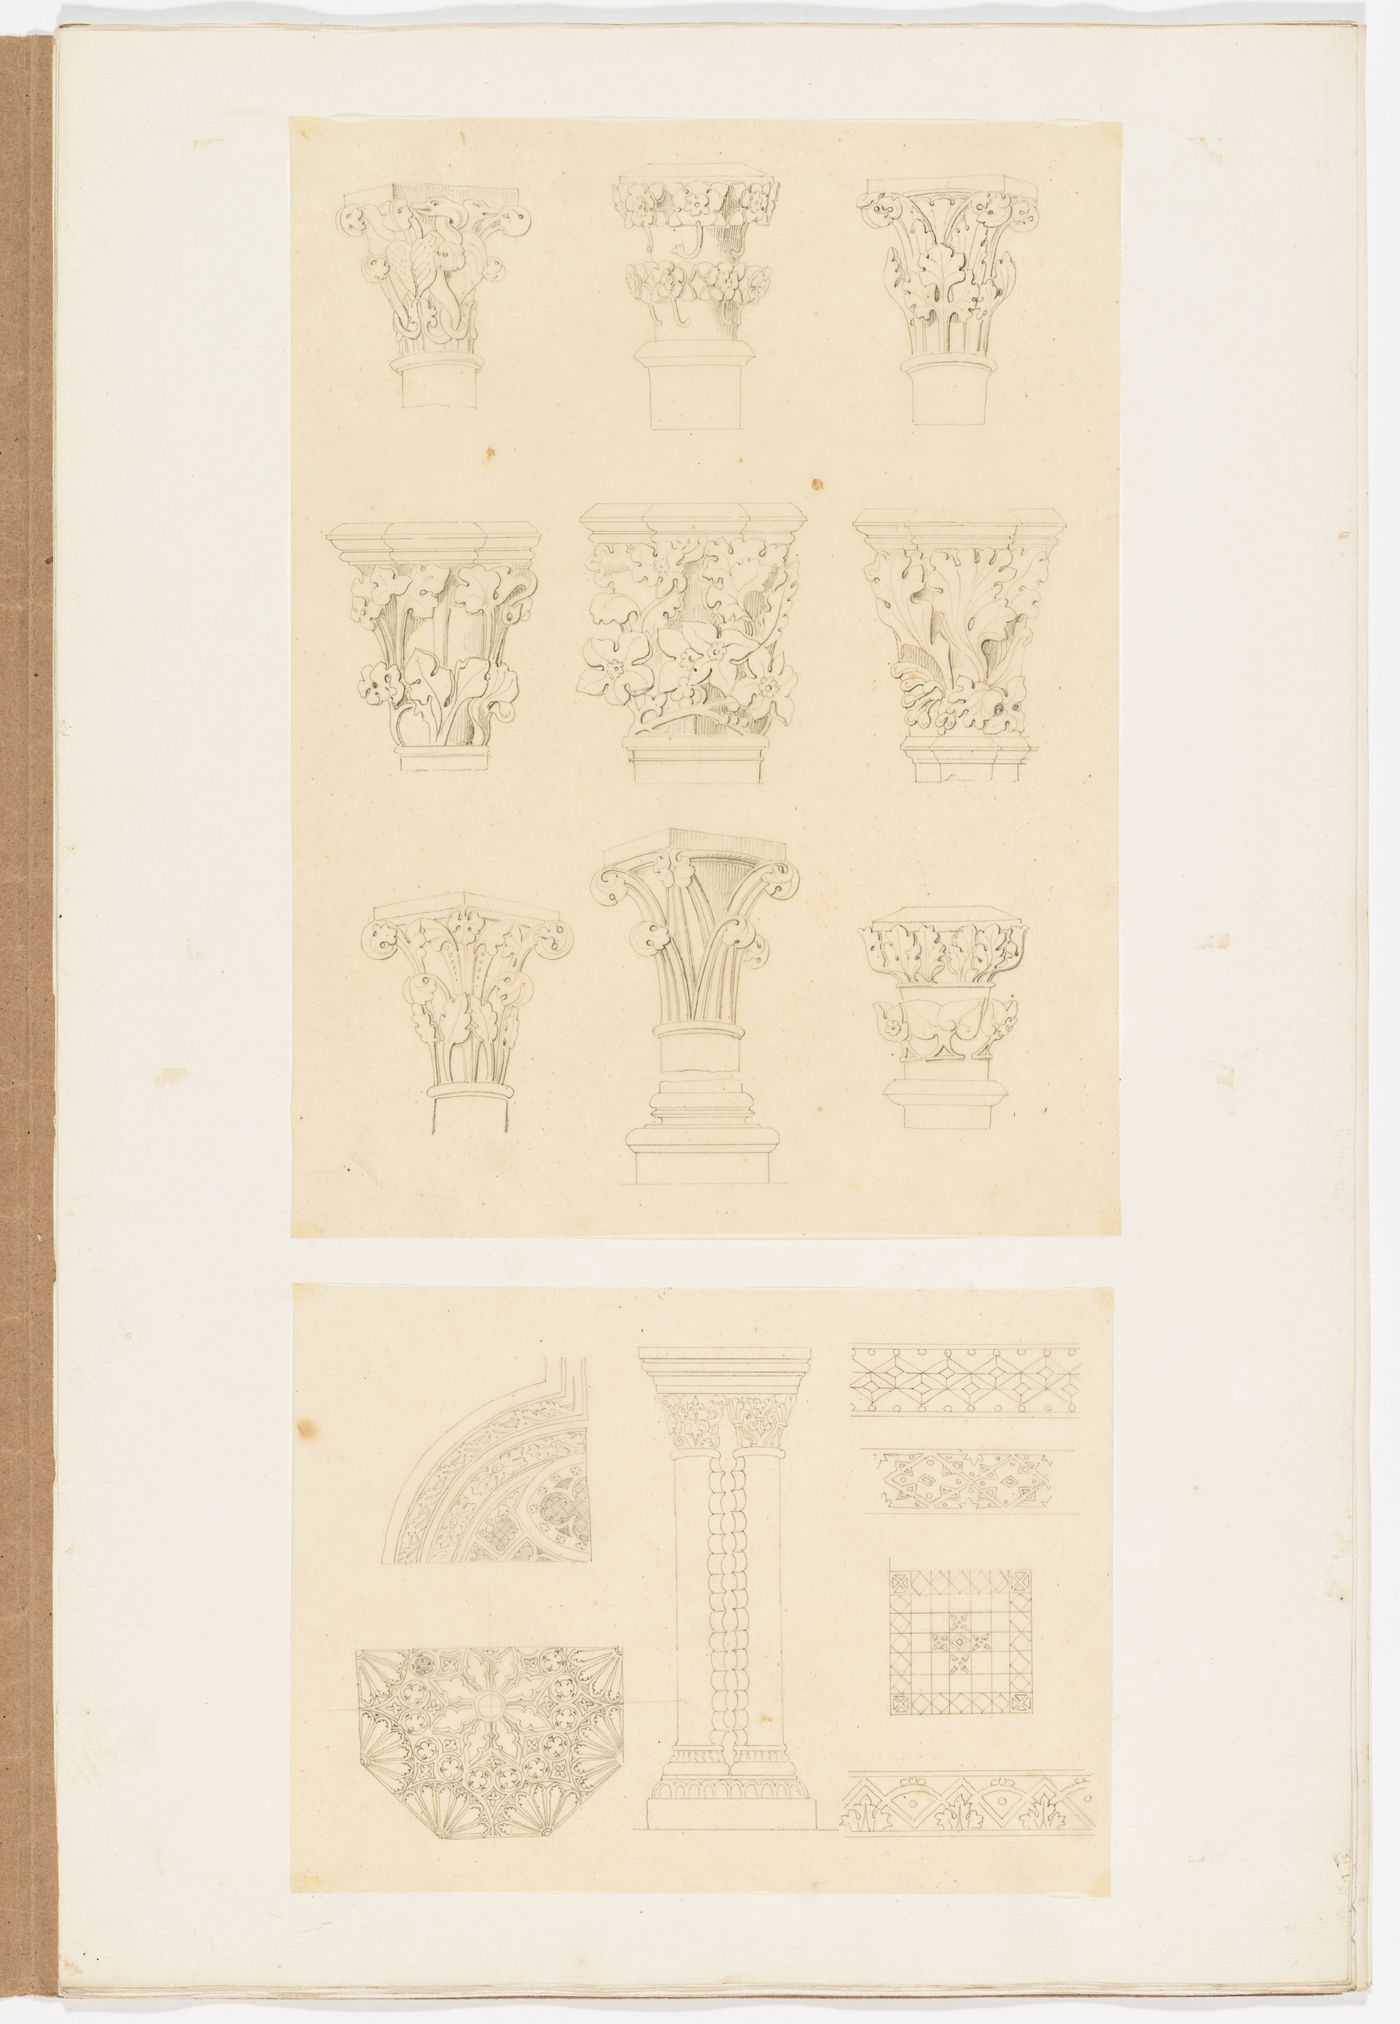 Drawings of Gothic capitals, one with a base, a pair of scalloped columns, and bands and panels decorated with geometric patterns and foliage